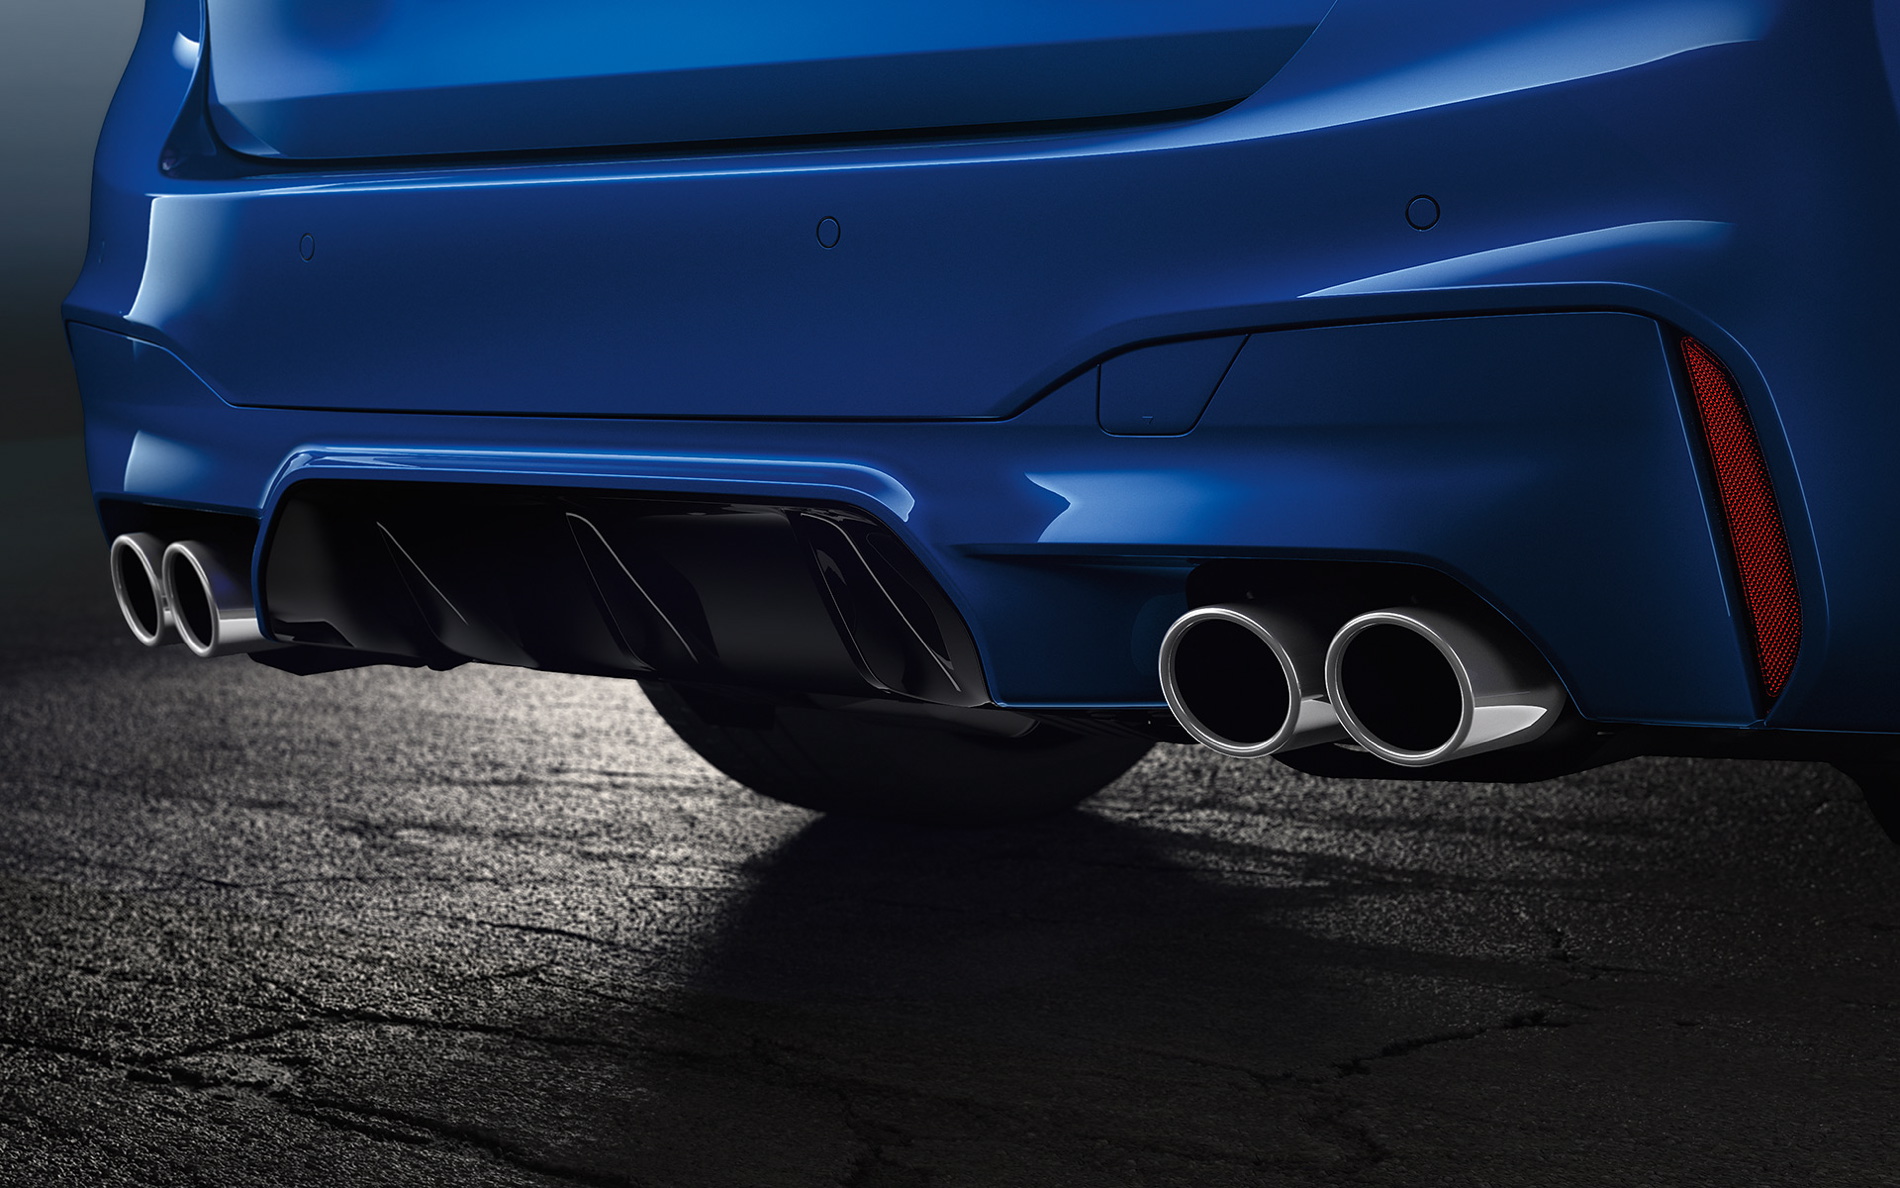 Wallpaper Of The New Bmw F90 M5